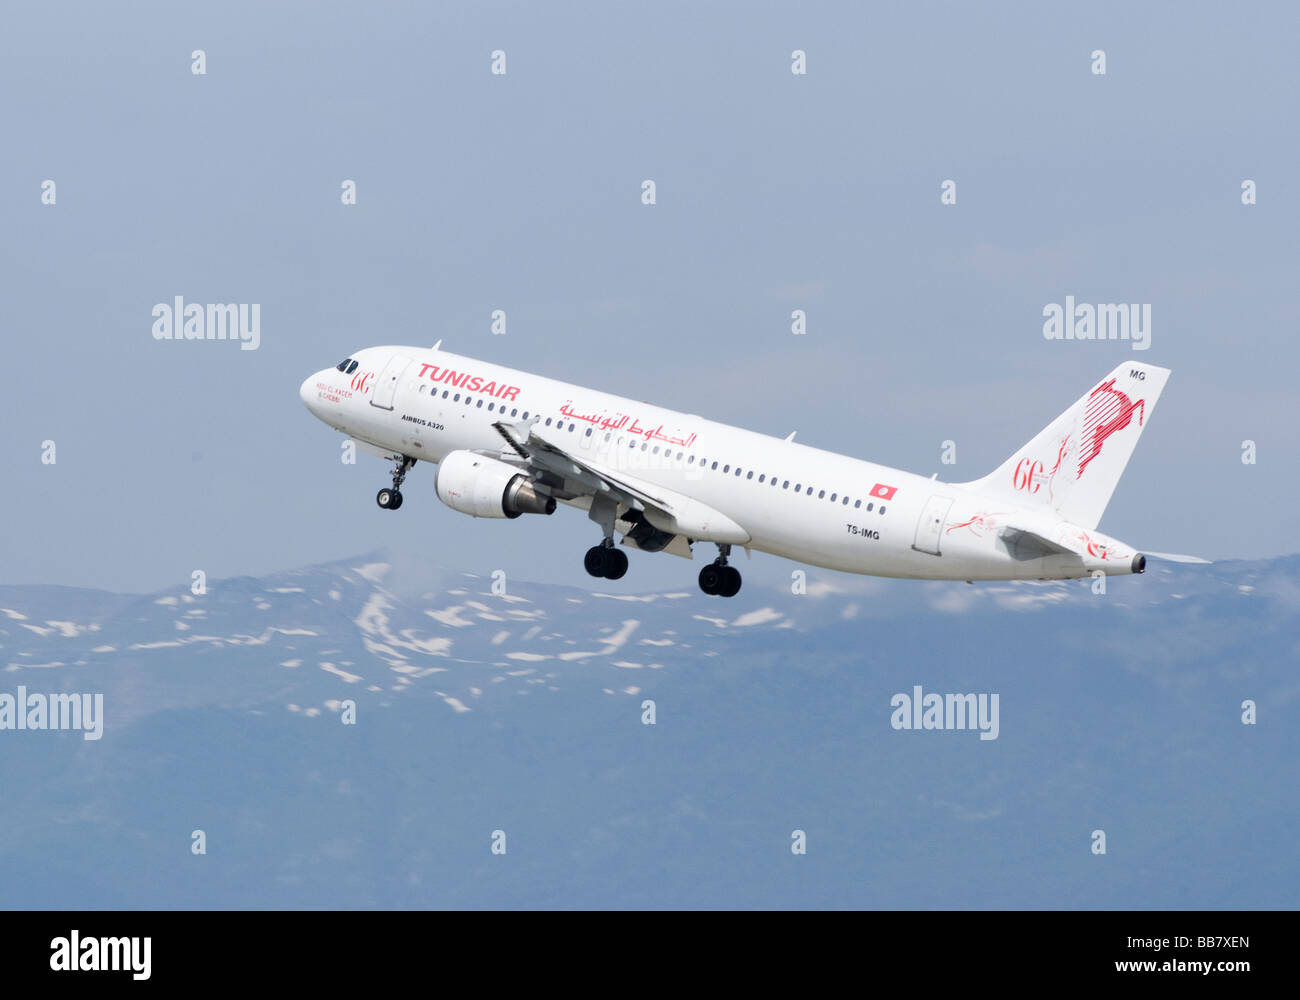 Tunisair Airbus A320-211 TS-IMG Airliner Taking Off from Geneva Airport Switzerland Geneve Suisse Stock Photo